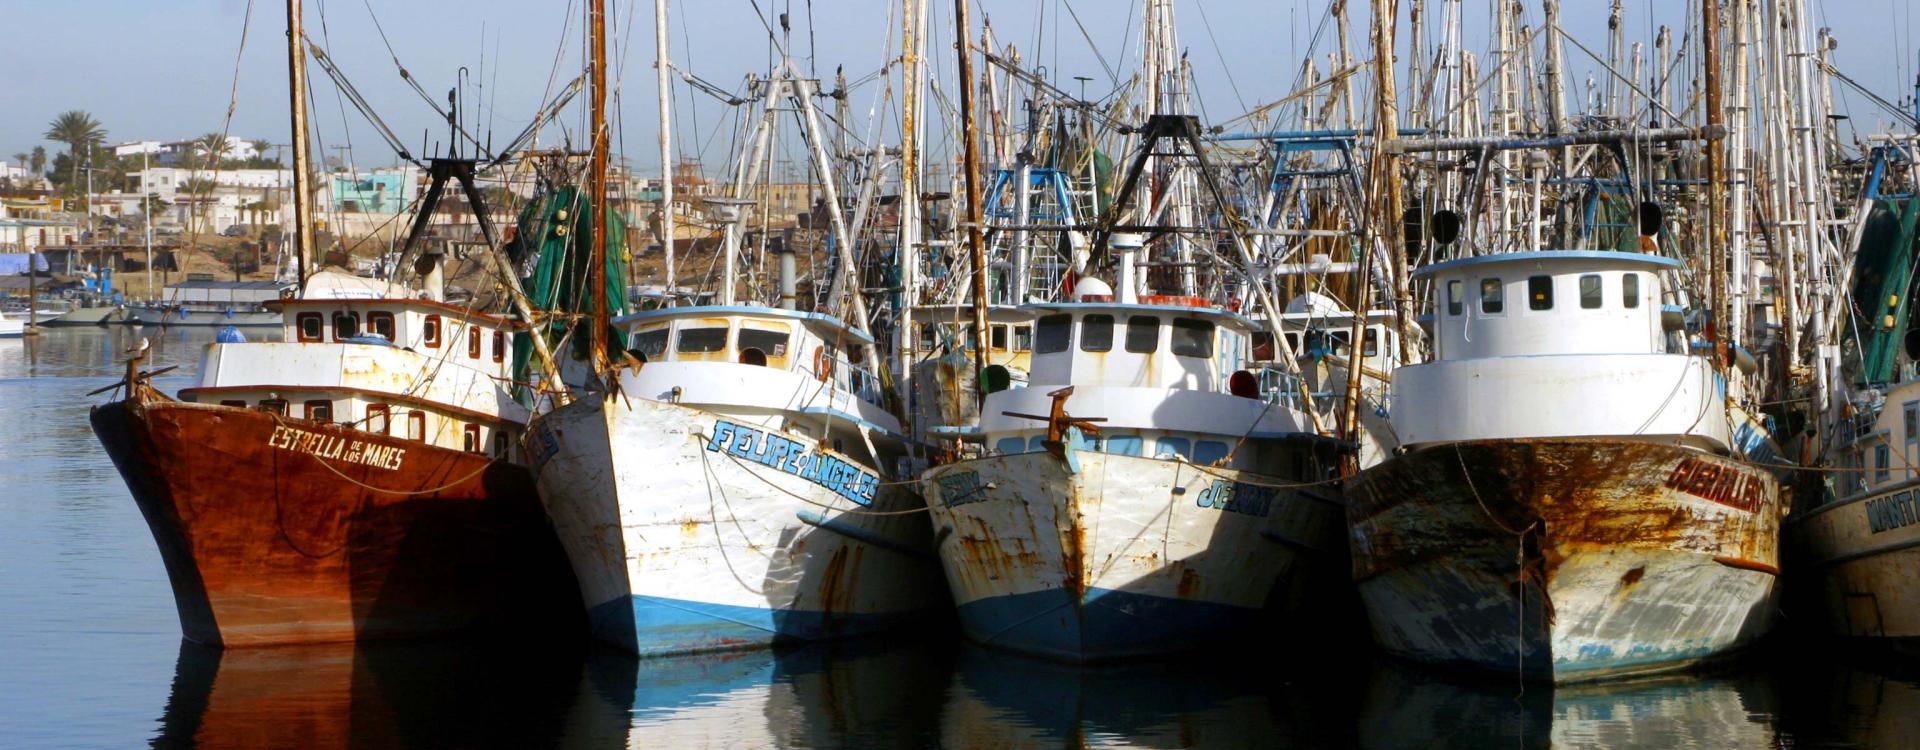 Fishing boats at a port in Mexico